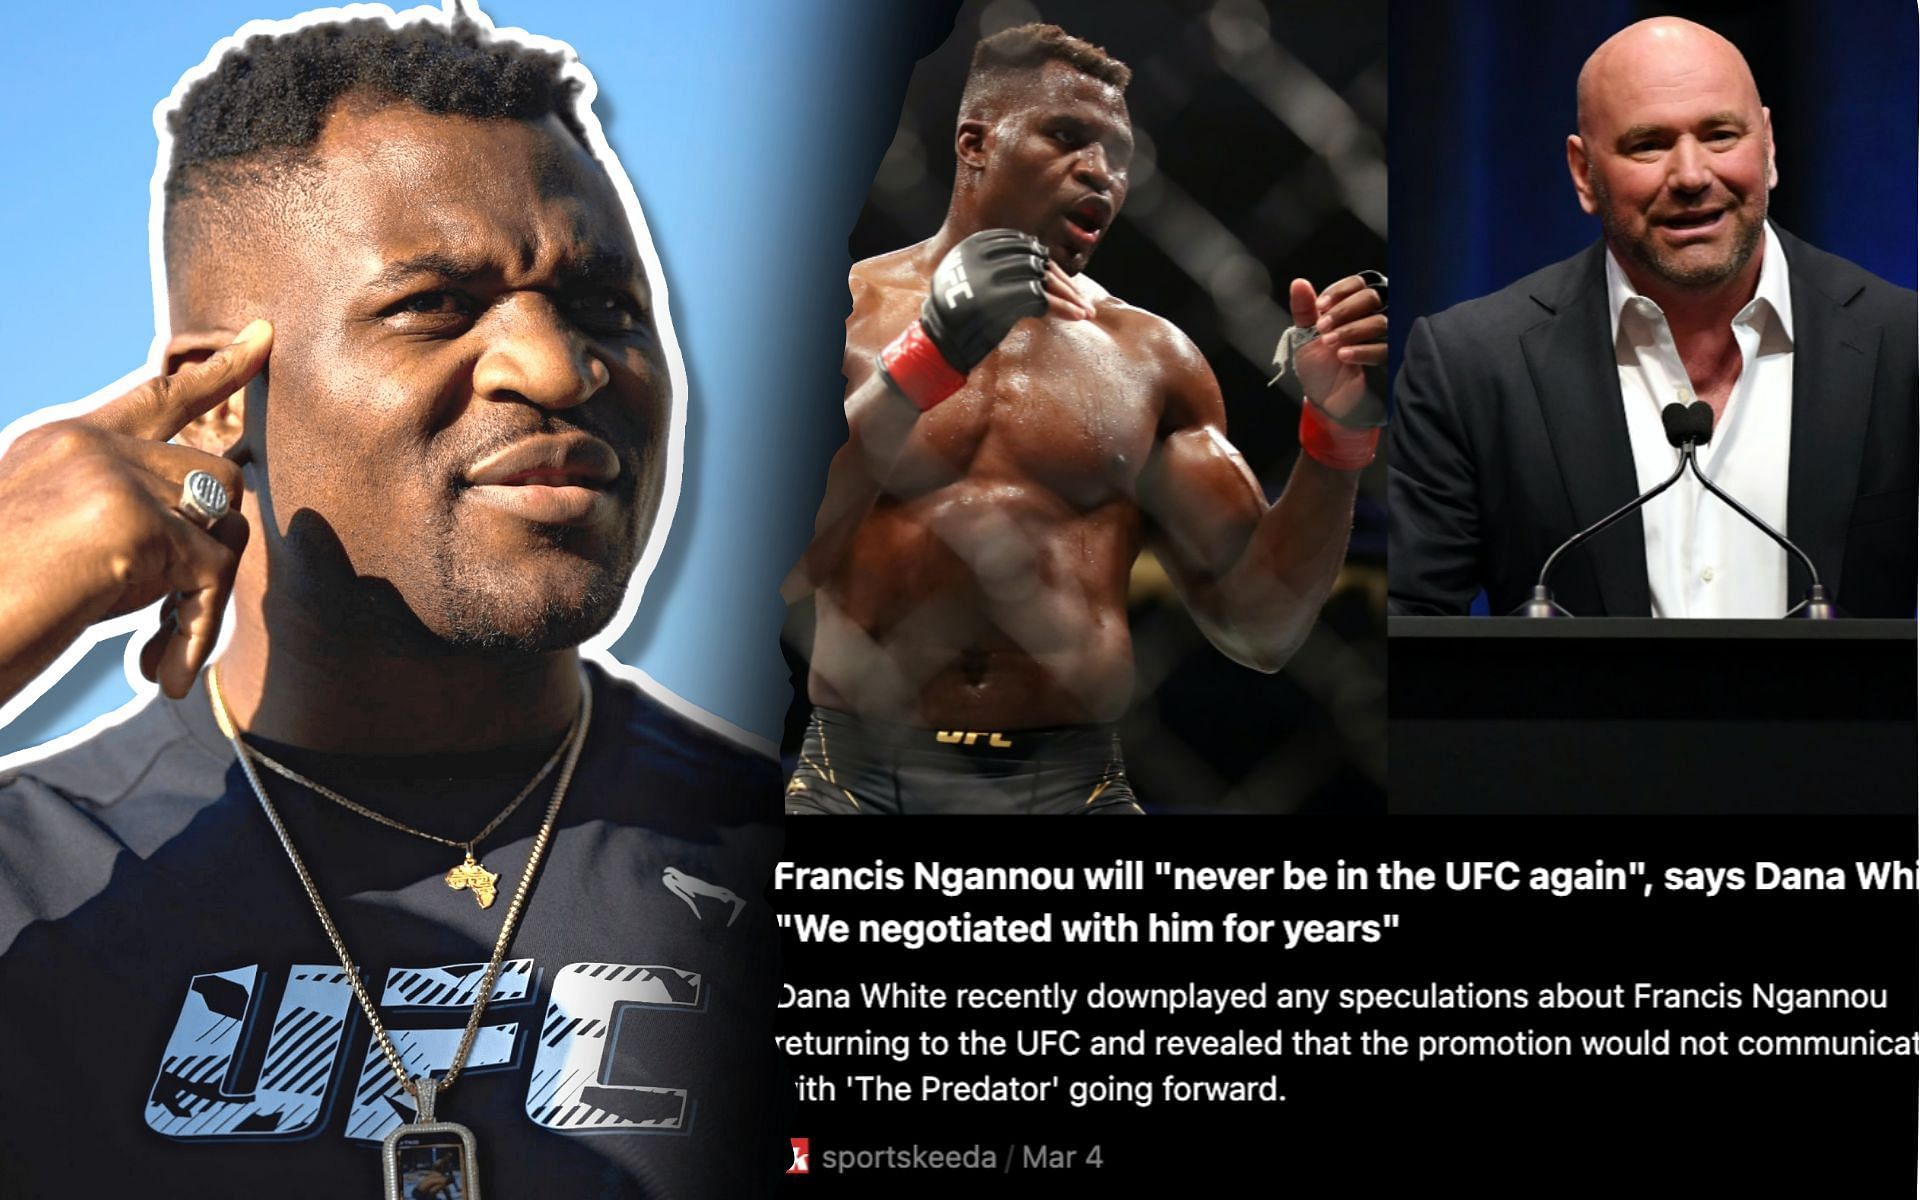 Francis Ngannou hilariously reacts to Dana White&rsquo;s &lsquo;He&rsquo;ll never be in the UFC again&rsquo; comments 